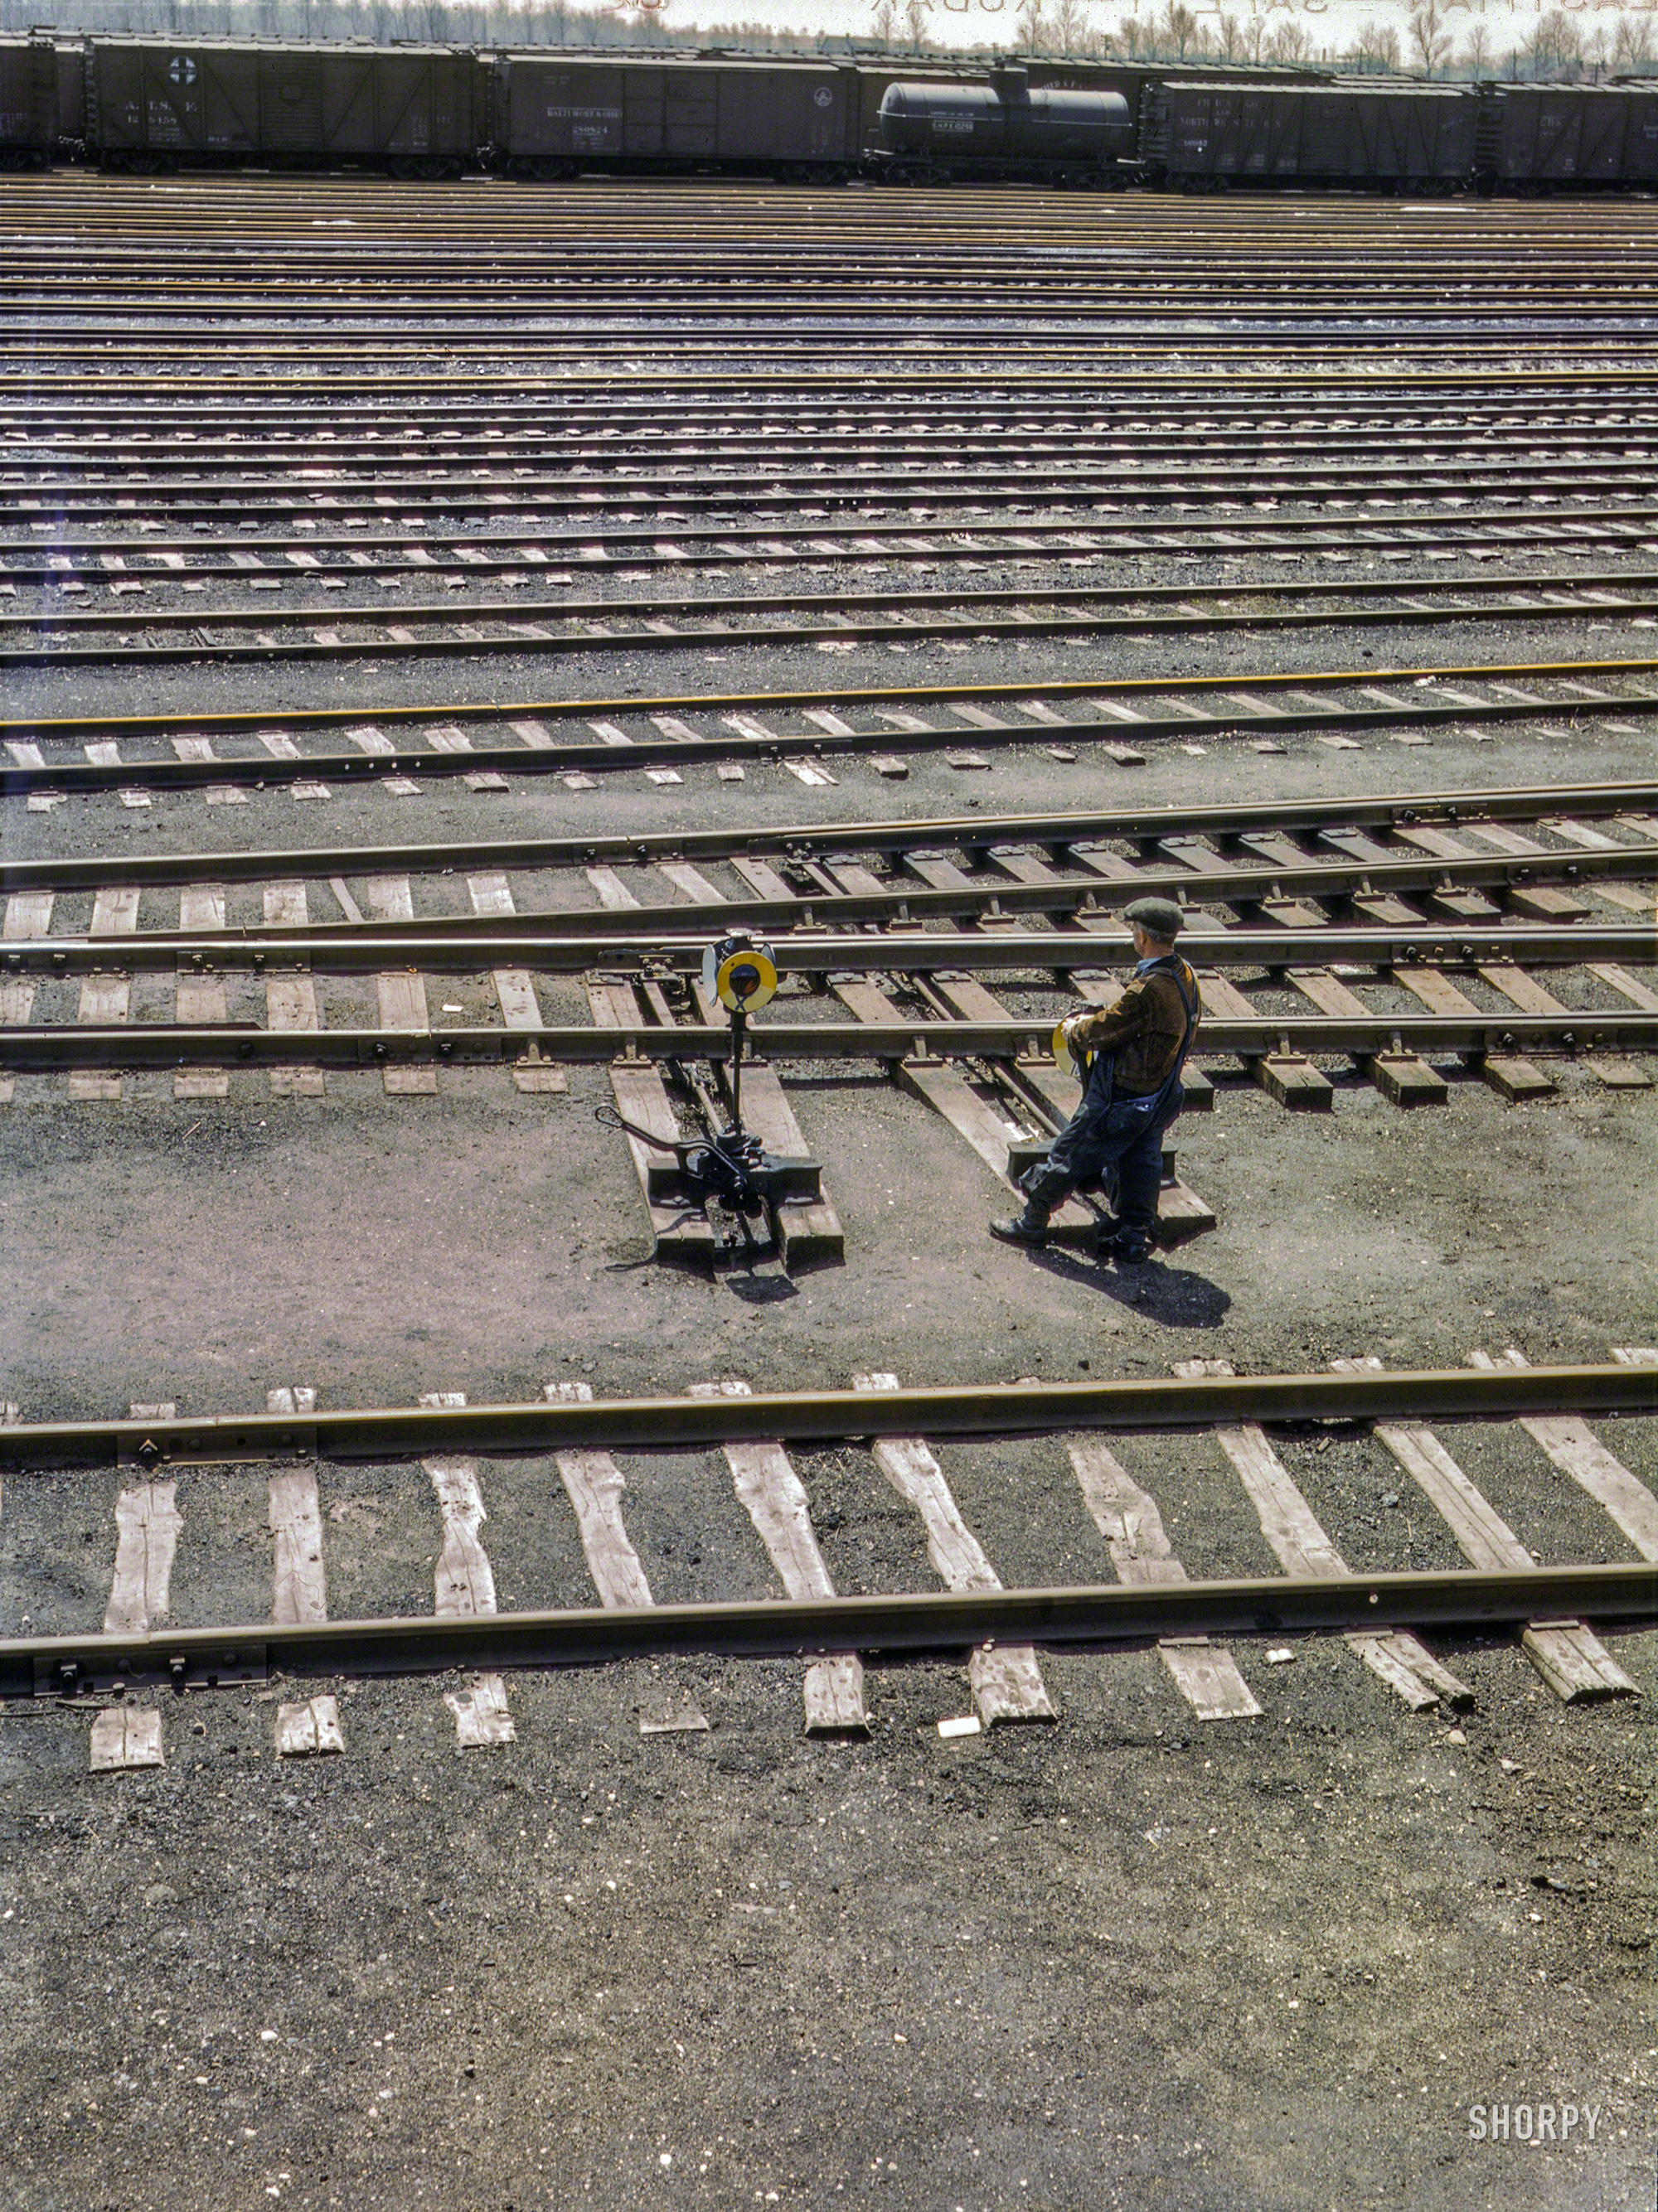 April 1943. "Switchman throwing a switch at the Chicago & North Western RR's Proviso Yard, Chicago, Ill." 4x5 inch Kodachrome transparency by Jack Delano for the Office of War Information. View full size.